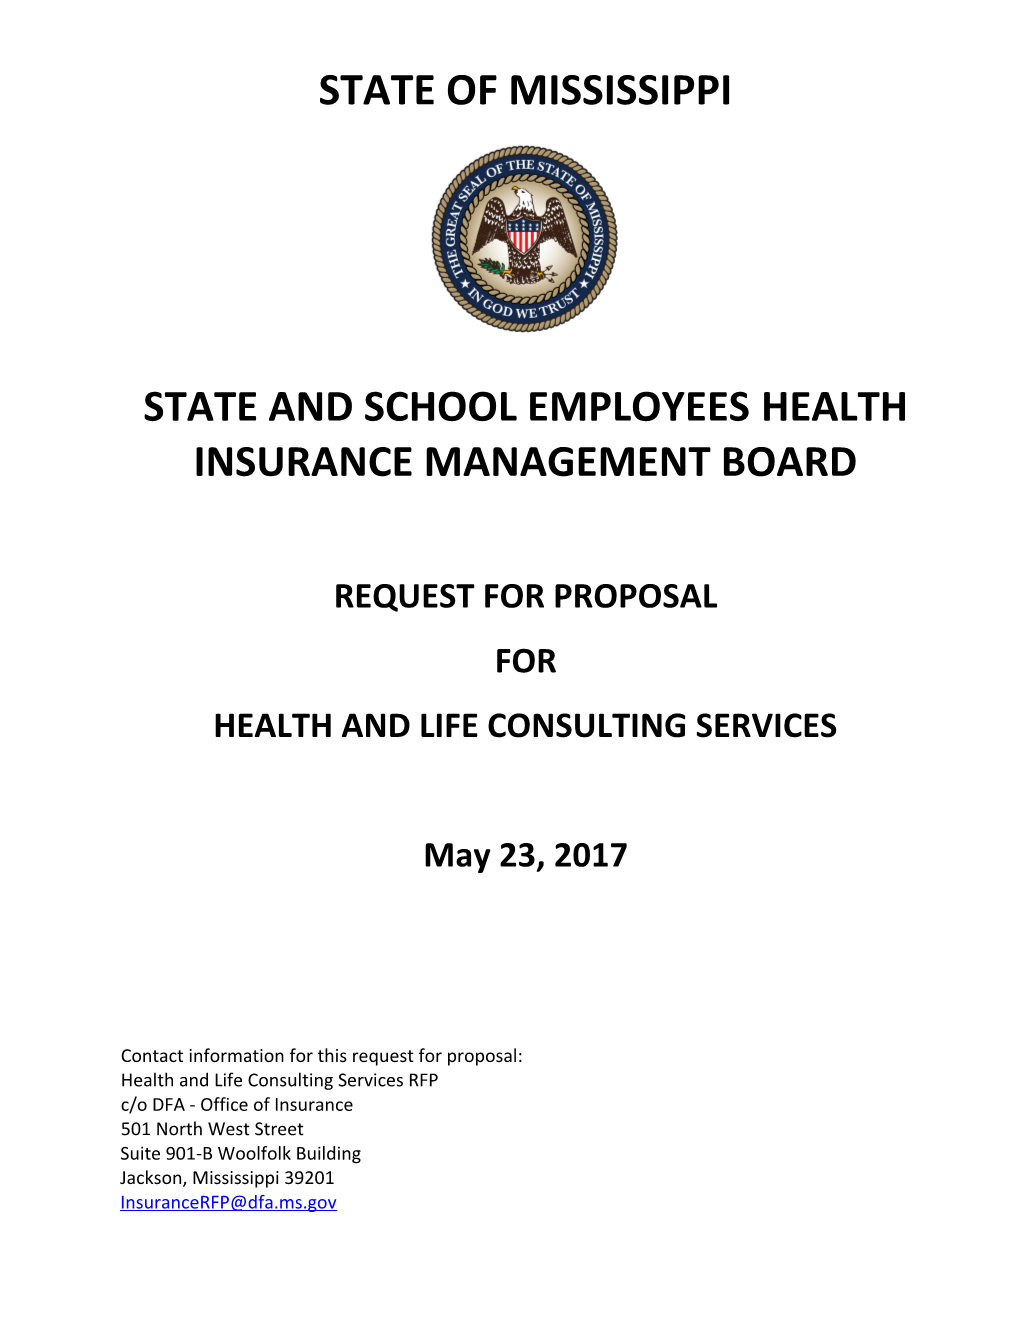 State and Schoolemployeeshealth Insurance Management Board